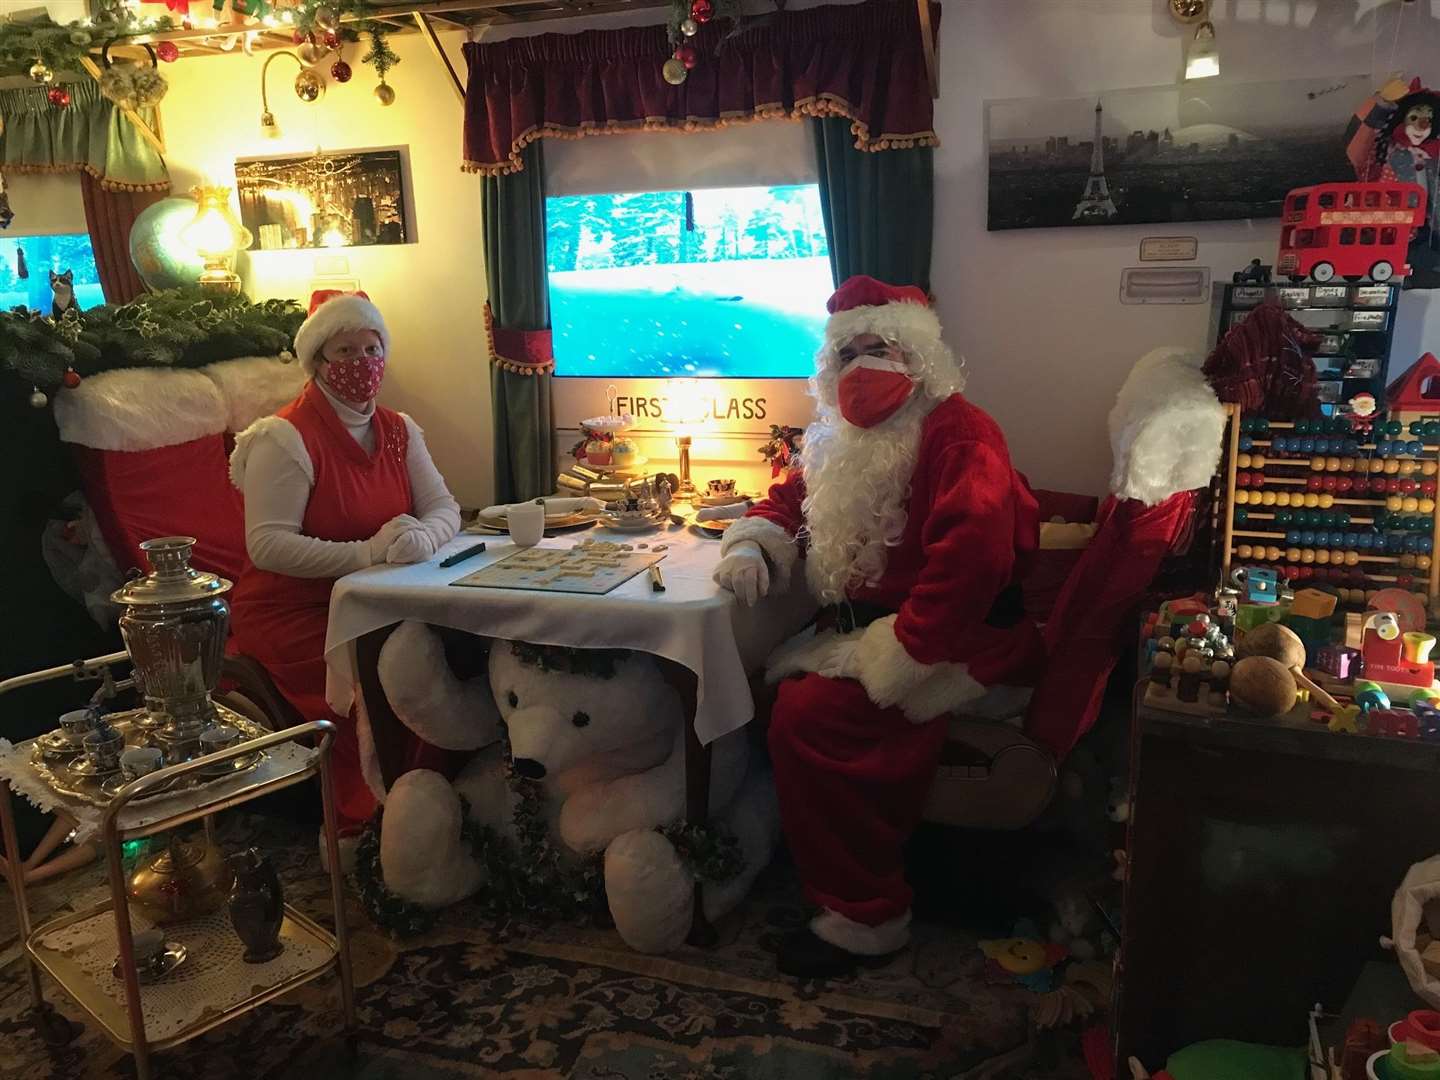 Santa and Mrs Claus on board the Polar Express.